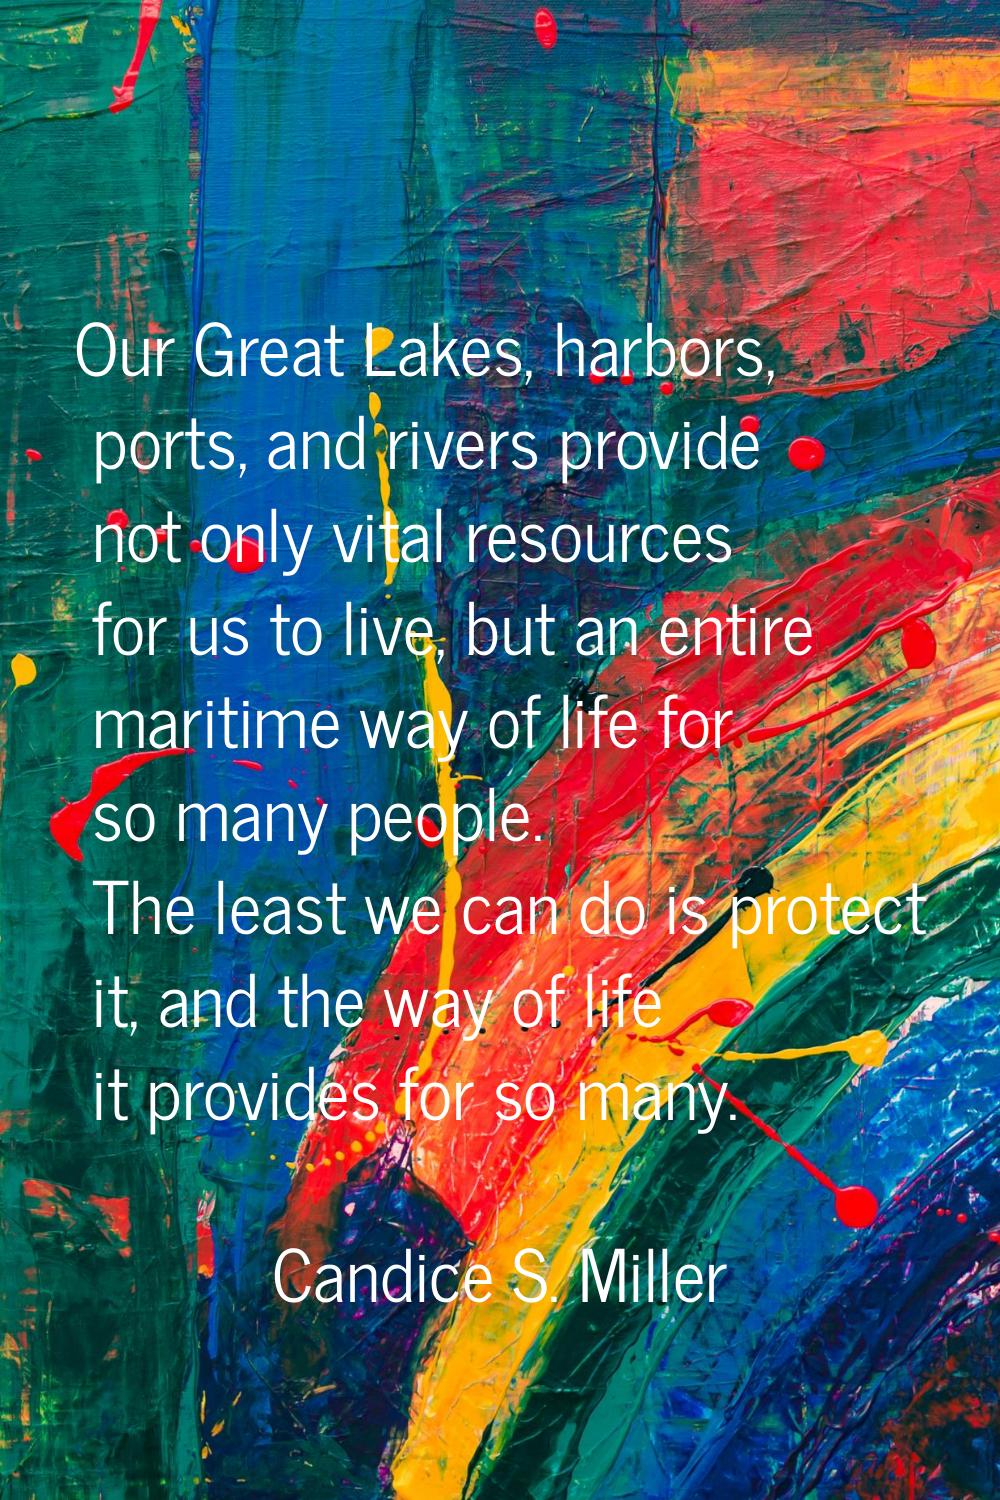 Our Great Lakes, harbors, ports, and rivers provide not only vital resources for us to live, but an